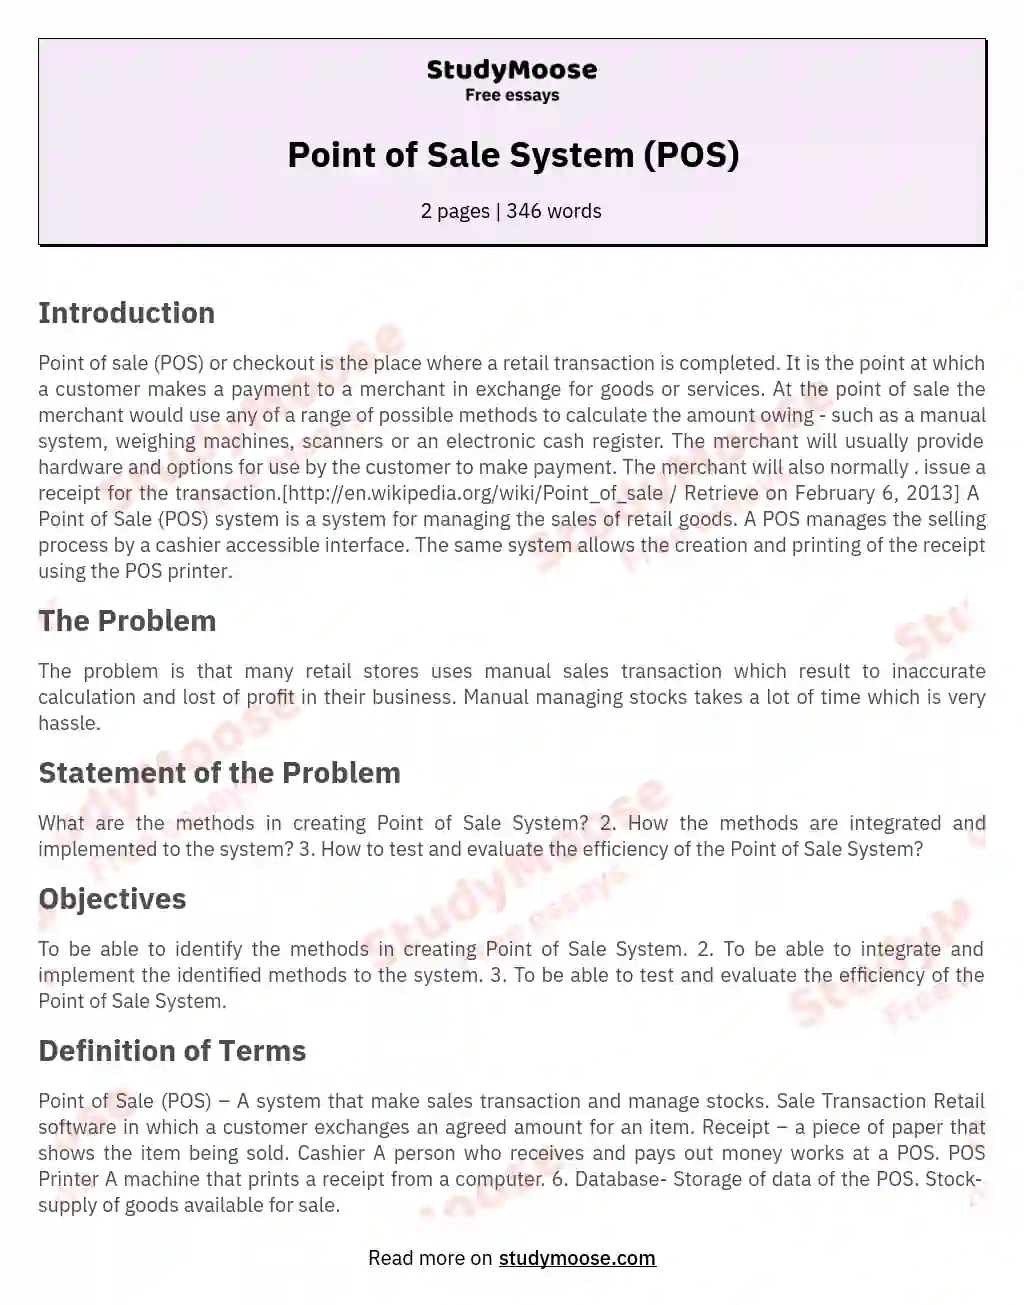 Point of Sale System (POS) essay